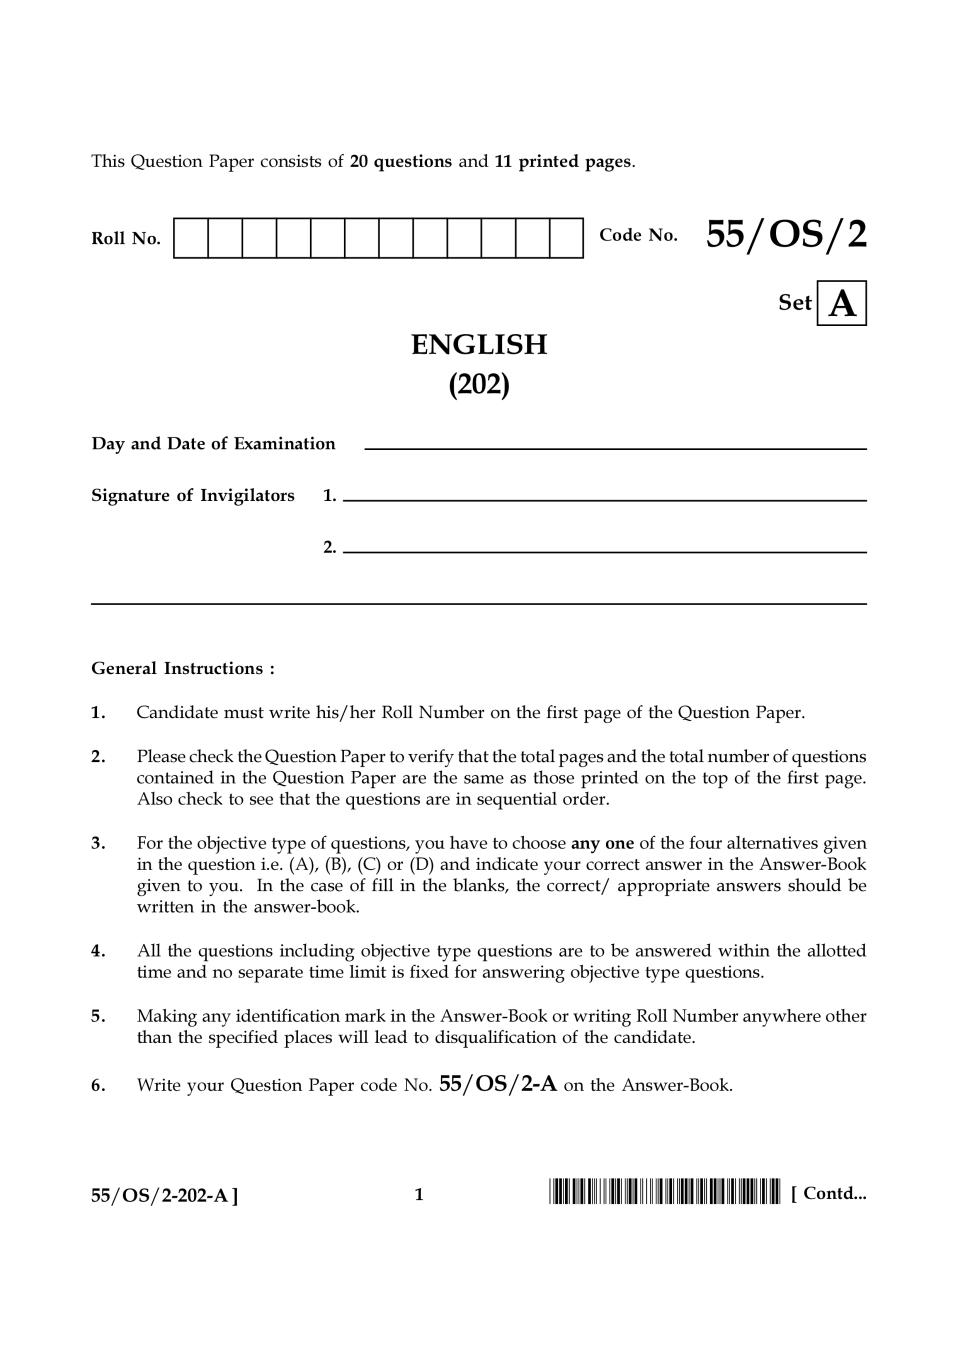 NIOS Class 10 Question Paper Oct 2017 - English - Page 1